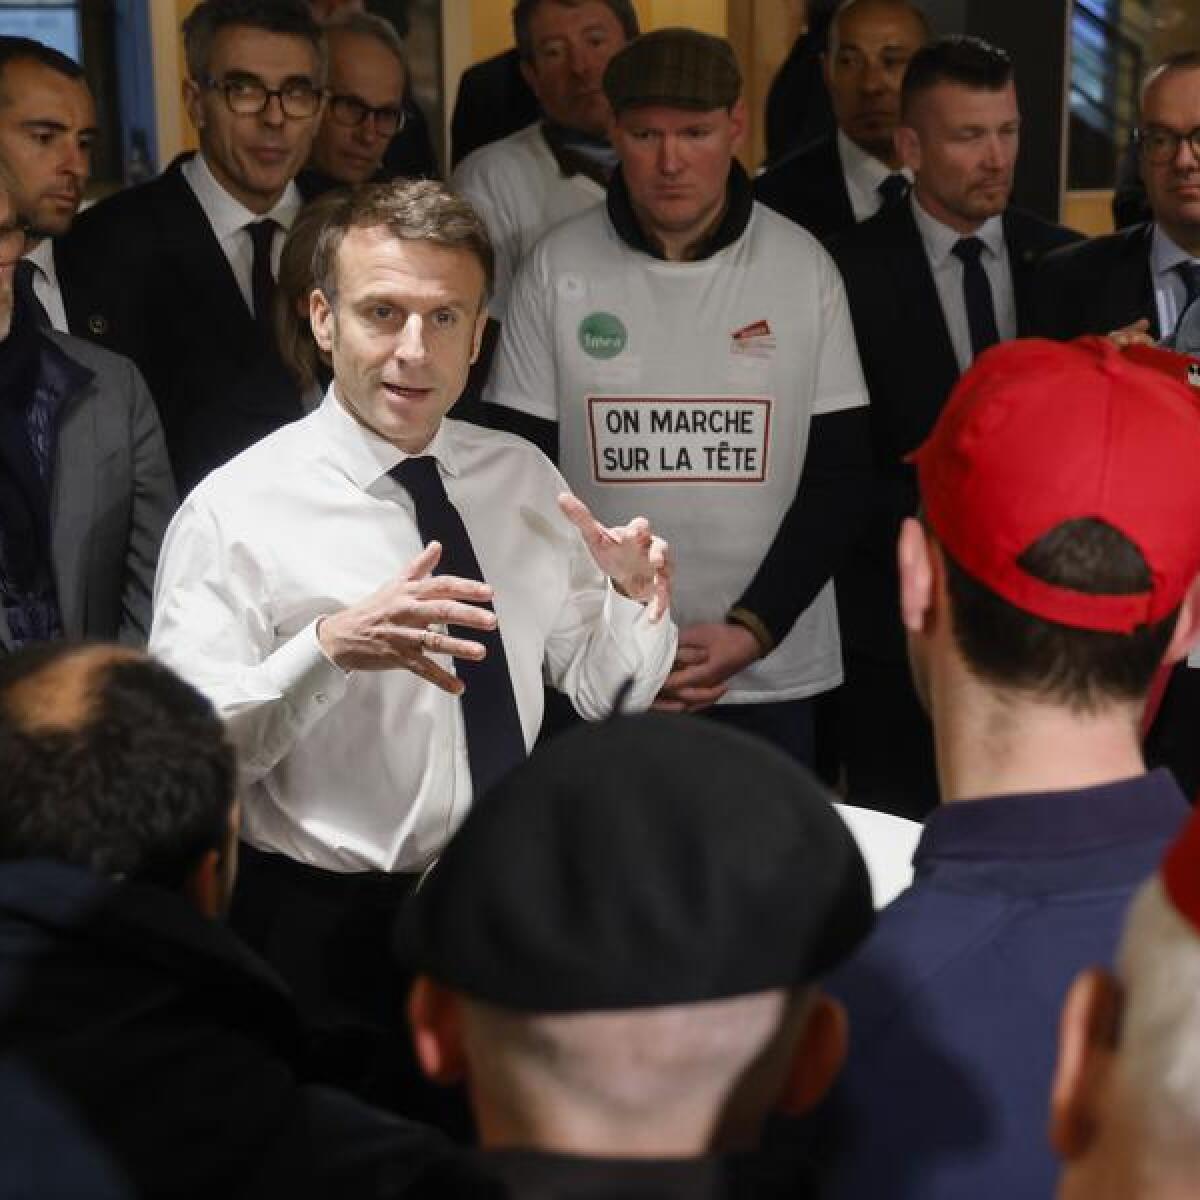 French President Emmanuel Macron in a discussion with farmers